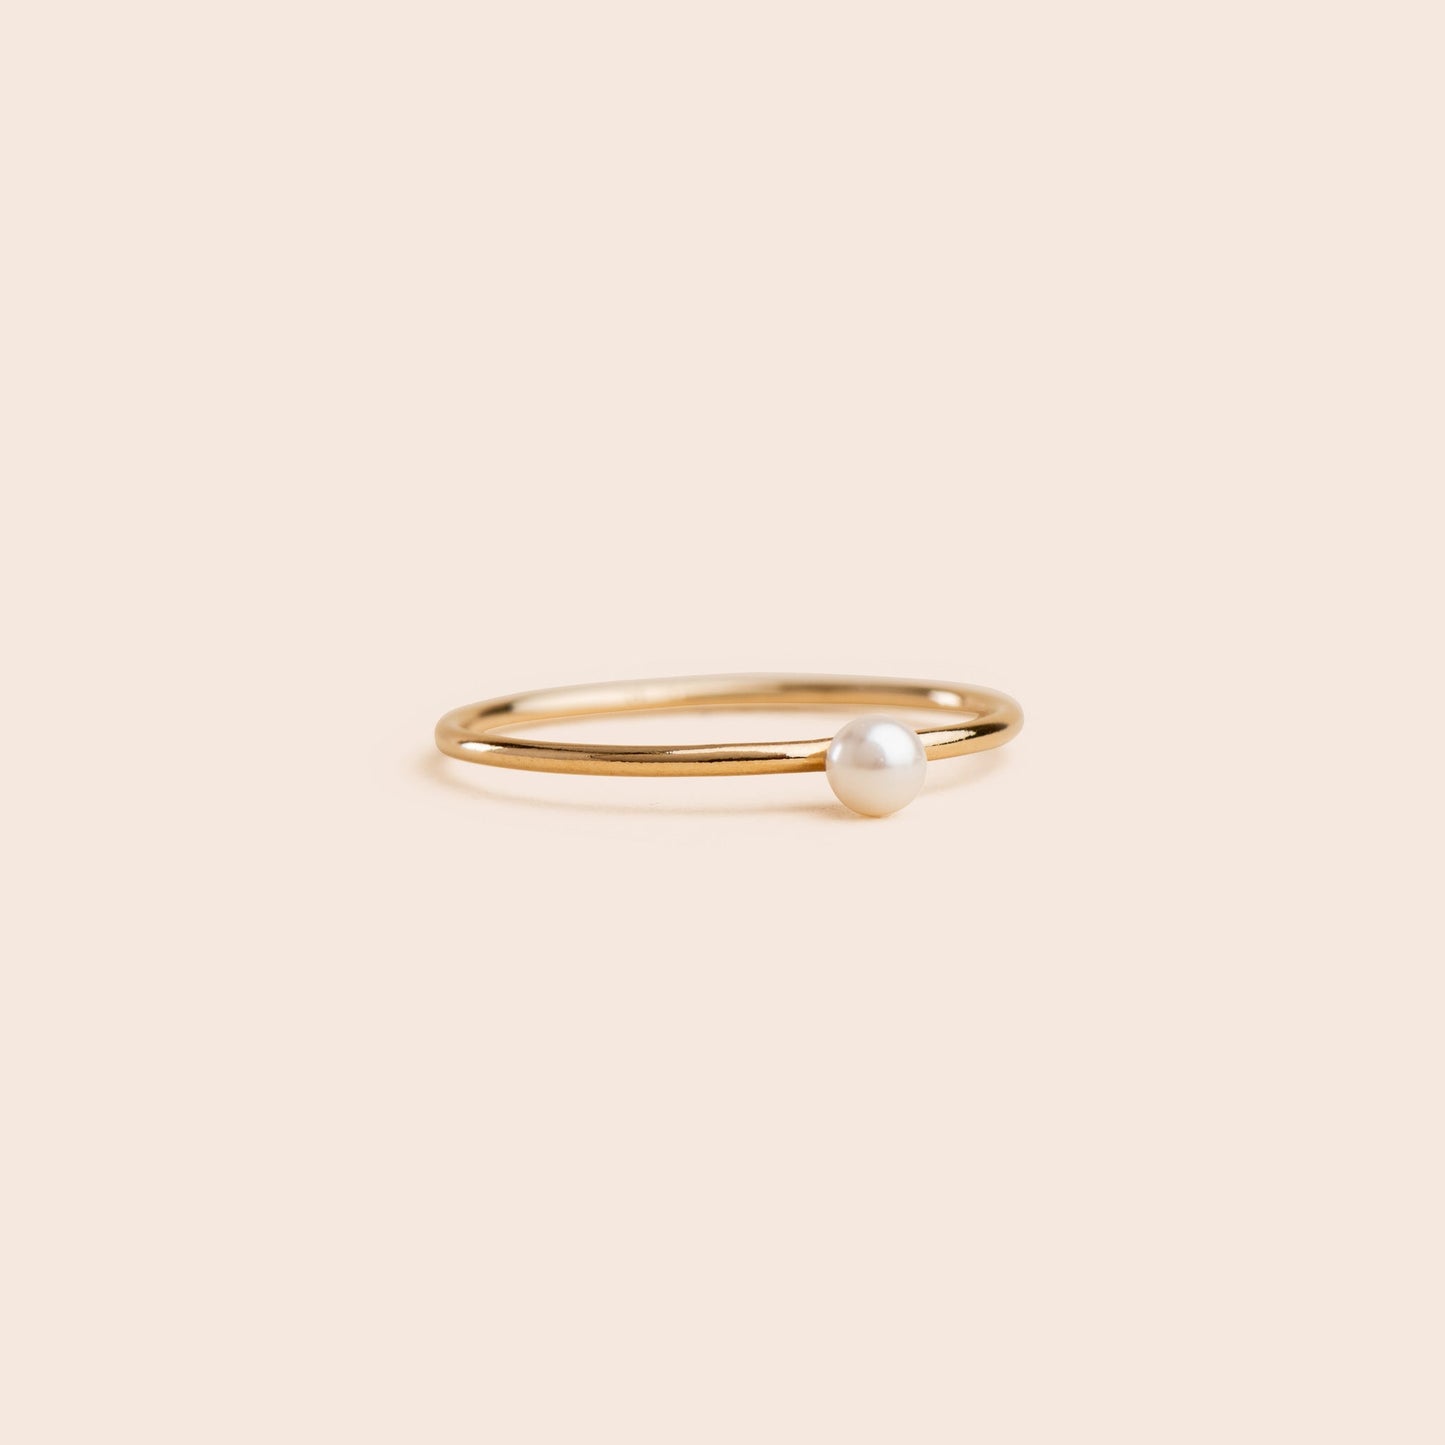 Tiny Pearl - Gold Filled Stacking Ring - Gemlet